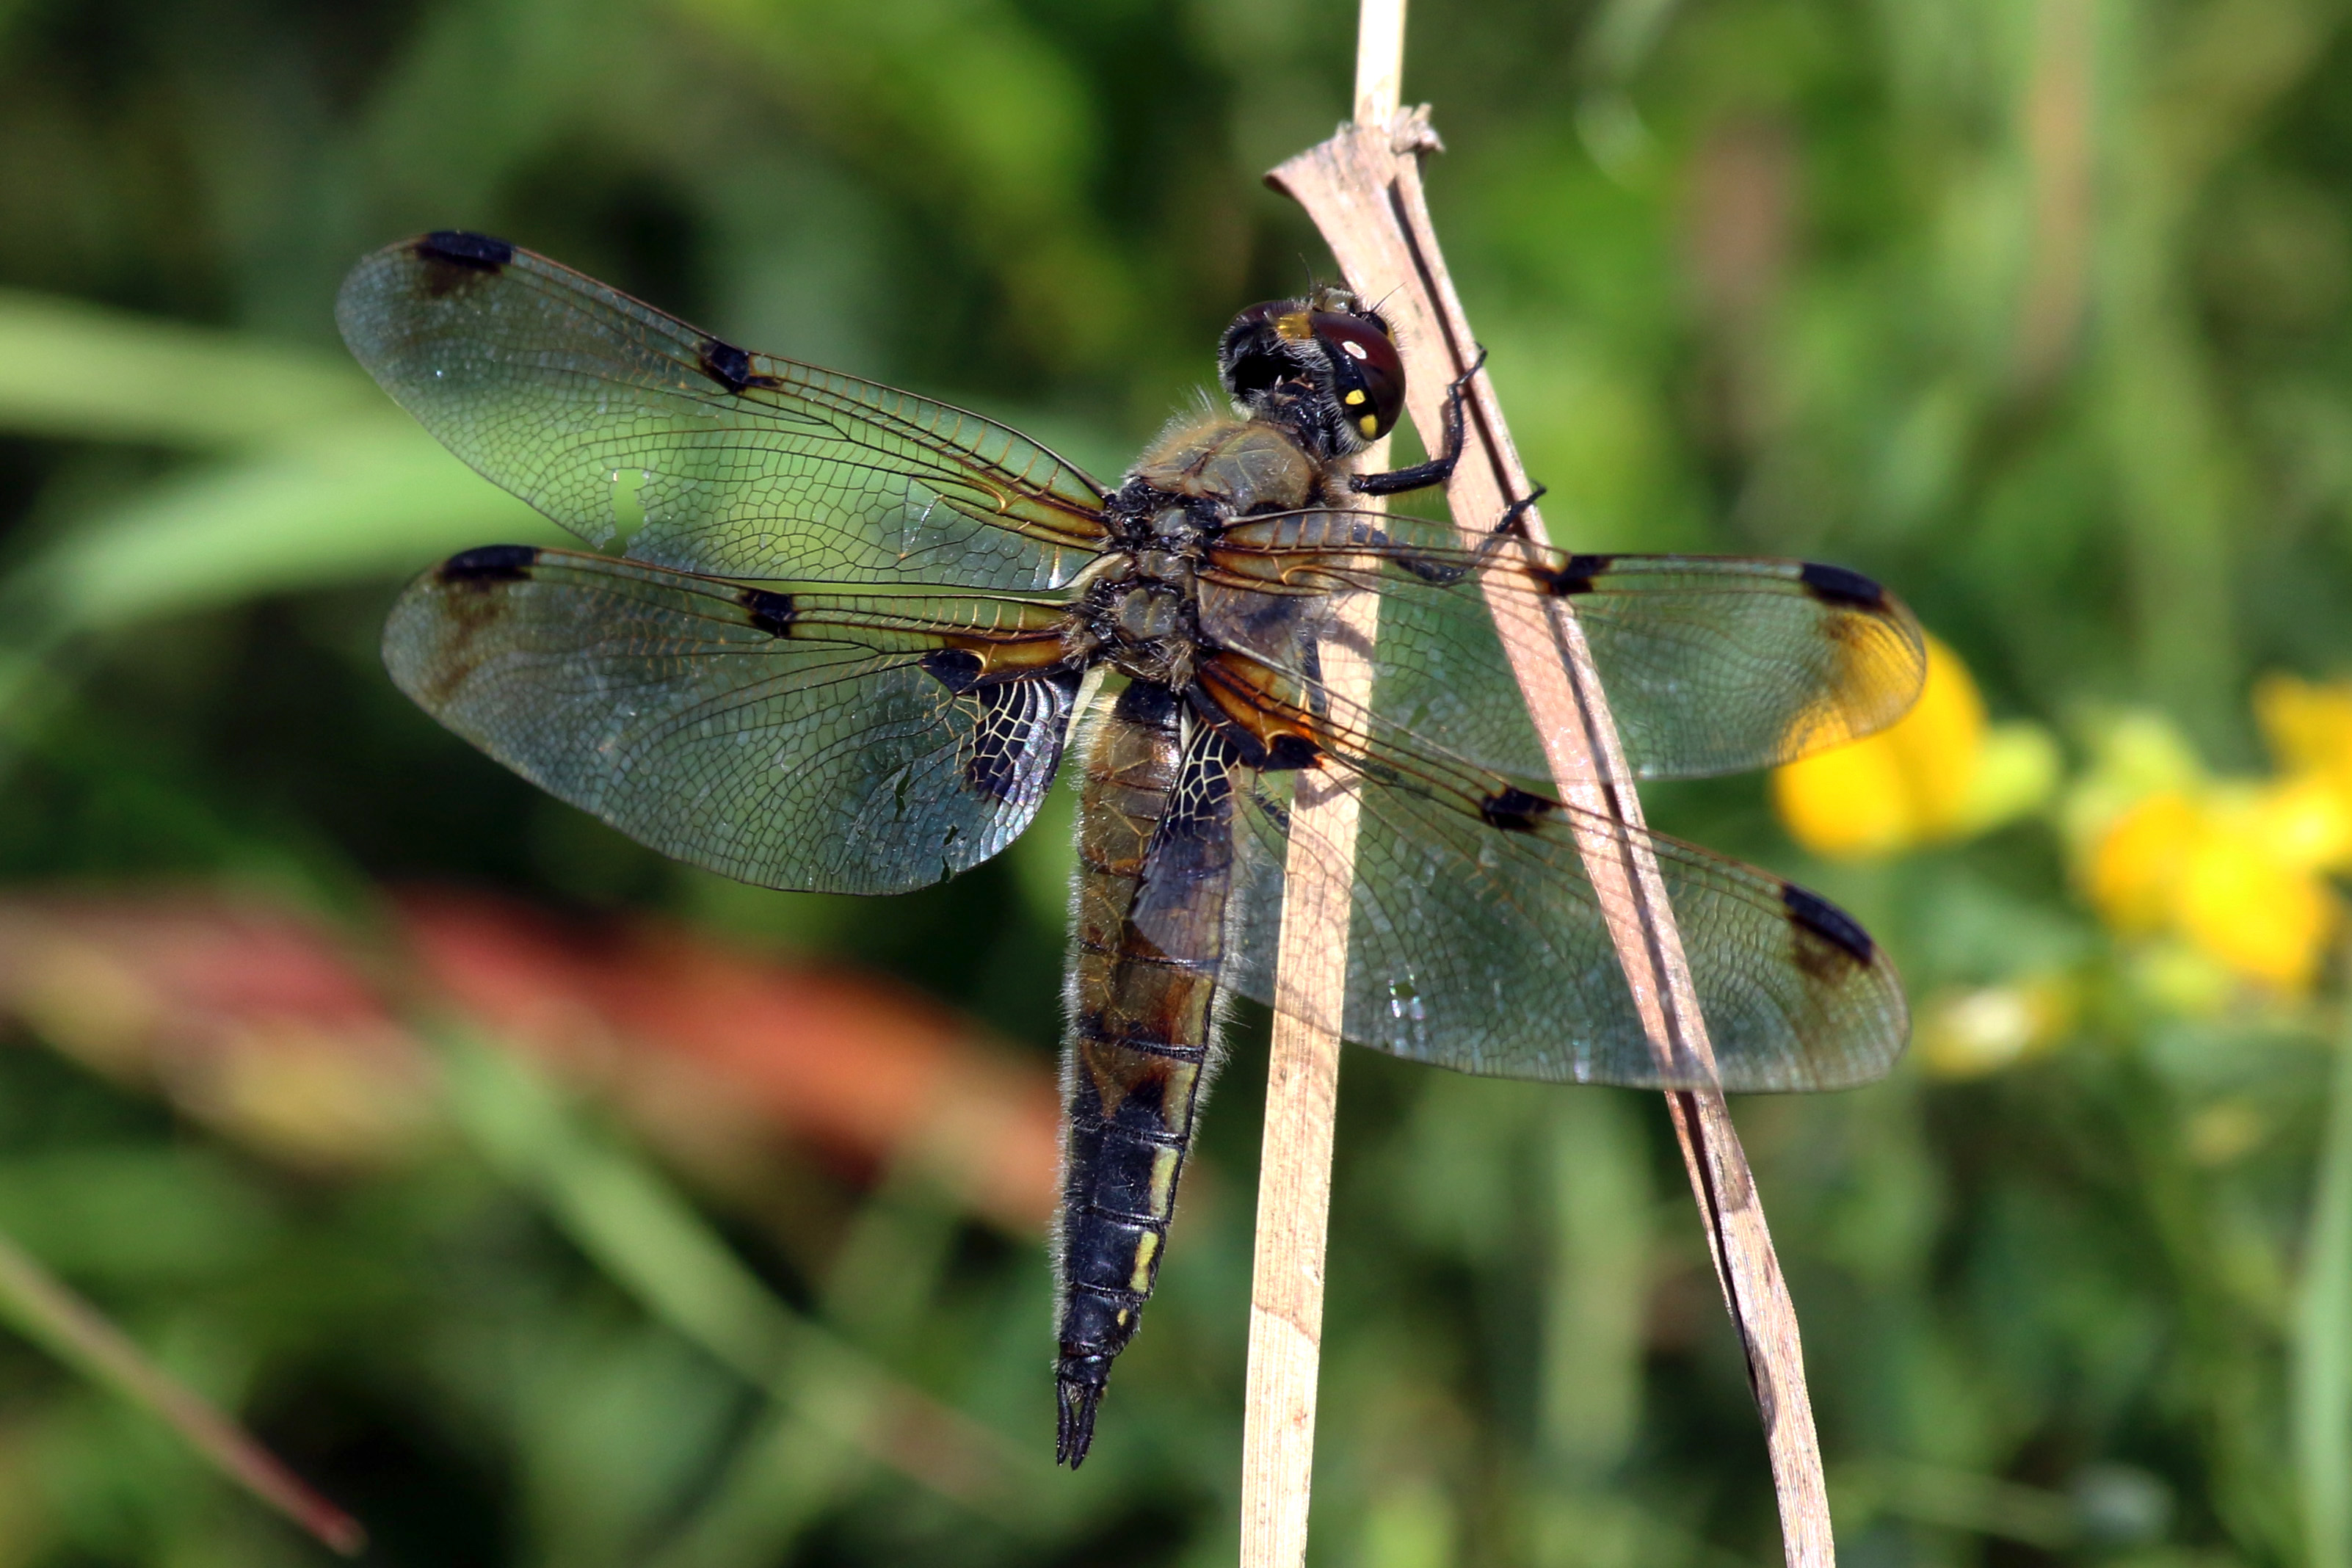 Four-spotted chaser dragonfly (Libellula quadrimaculata) female